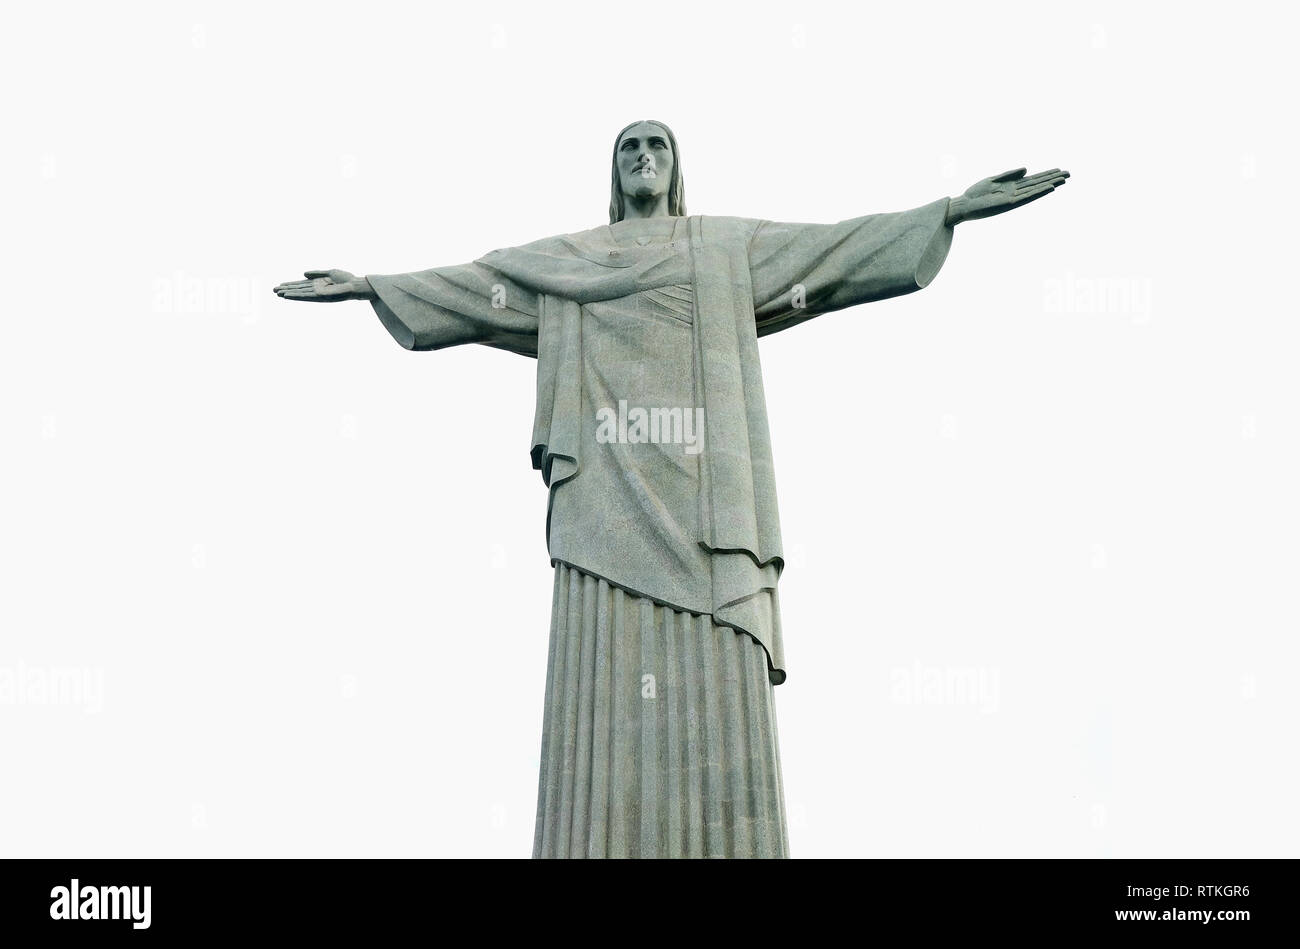 Christ the Redeemer, One of the New 7 Wonders of the World, Statue at the Peak of Corcovado Mountain, Rio de Janeiro, Brazil Stock Photo